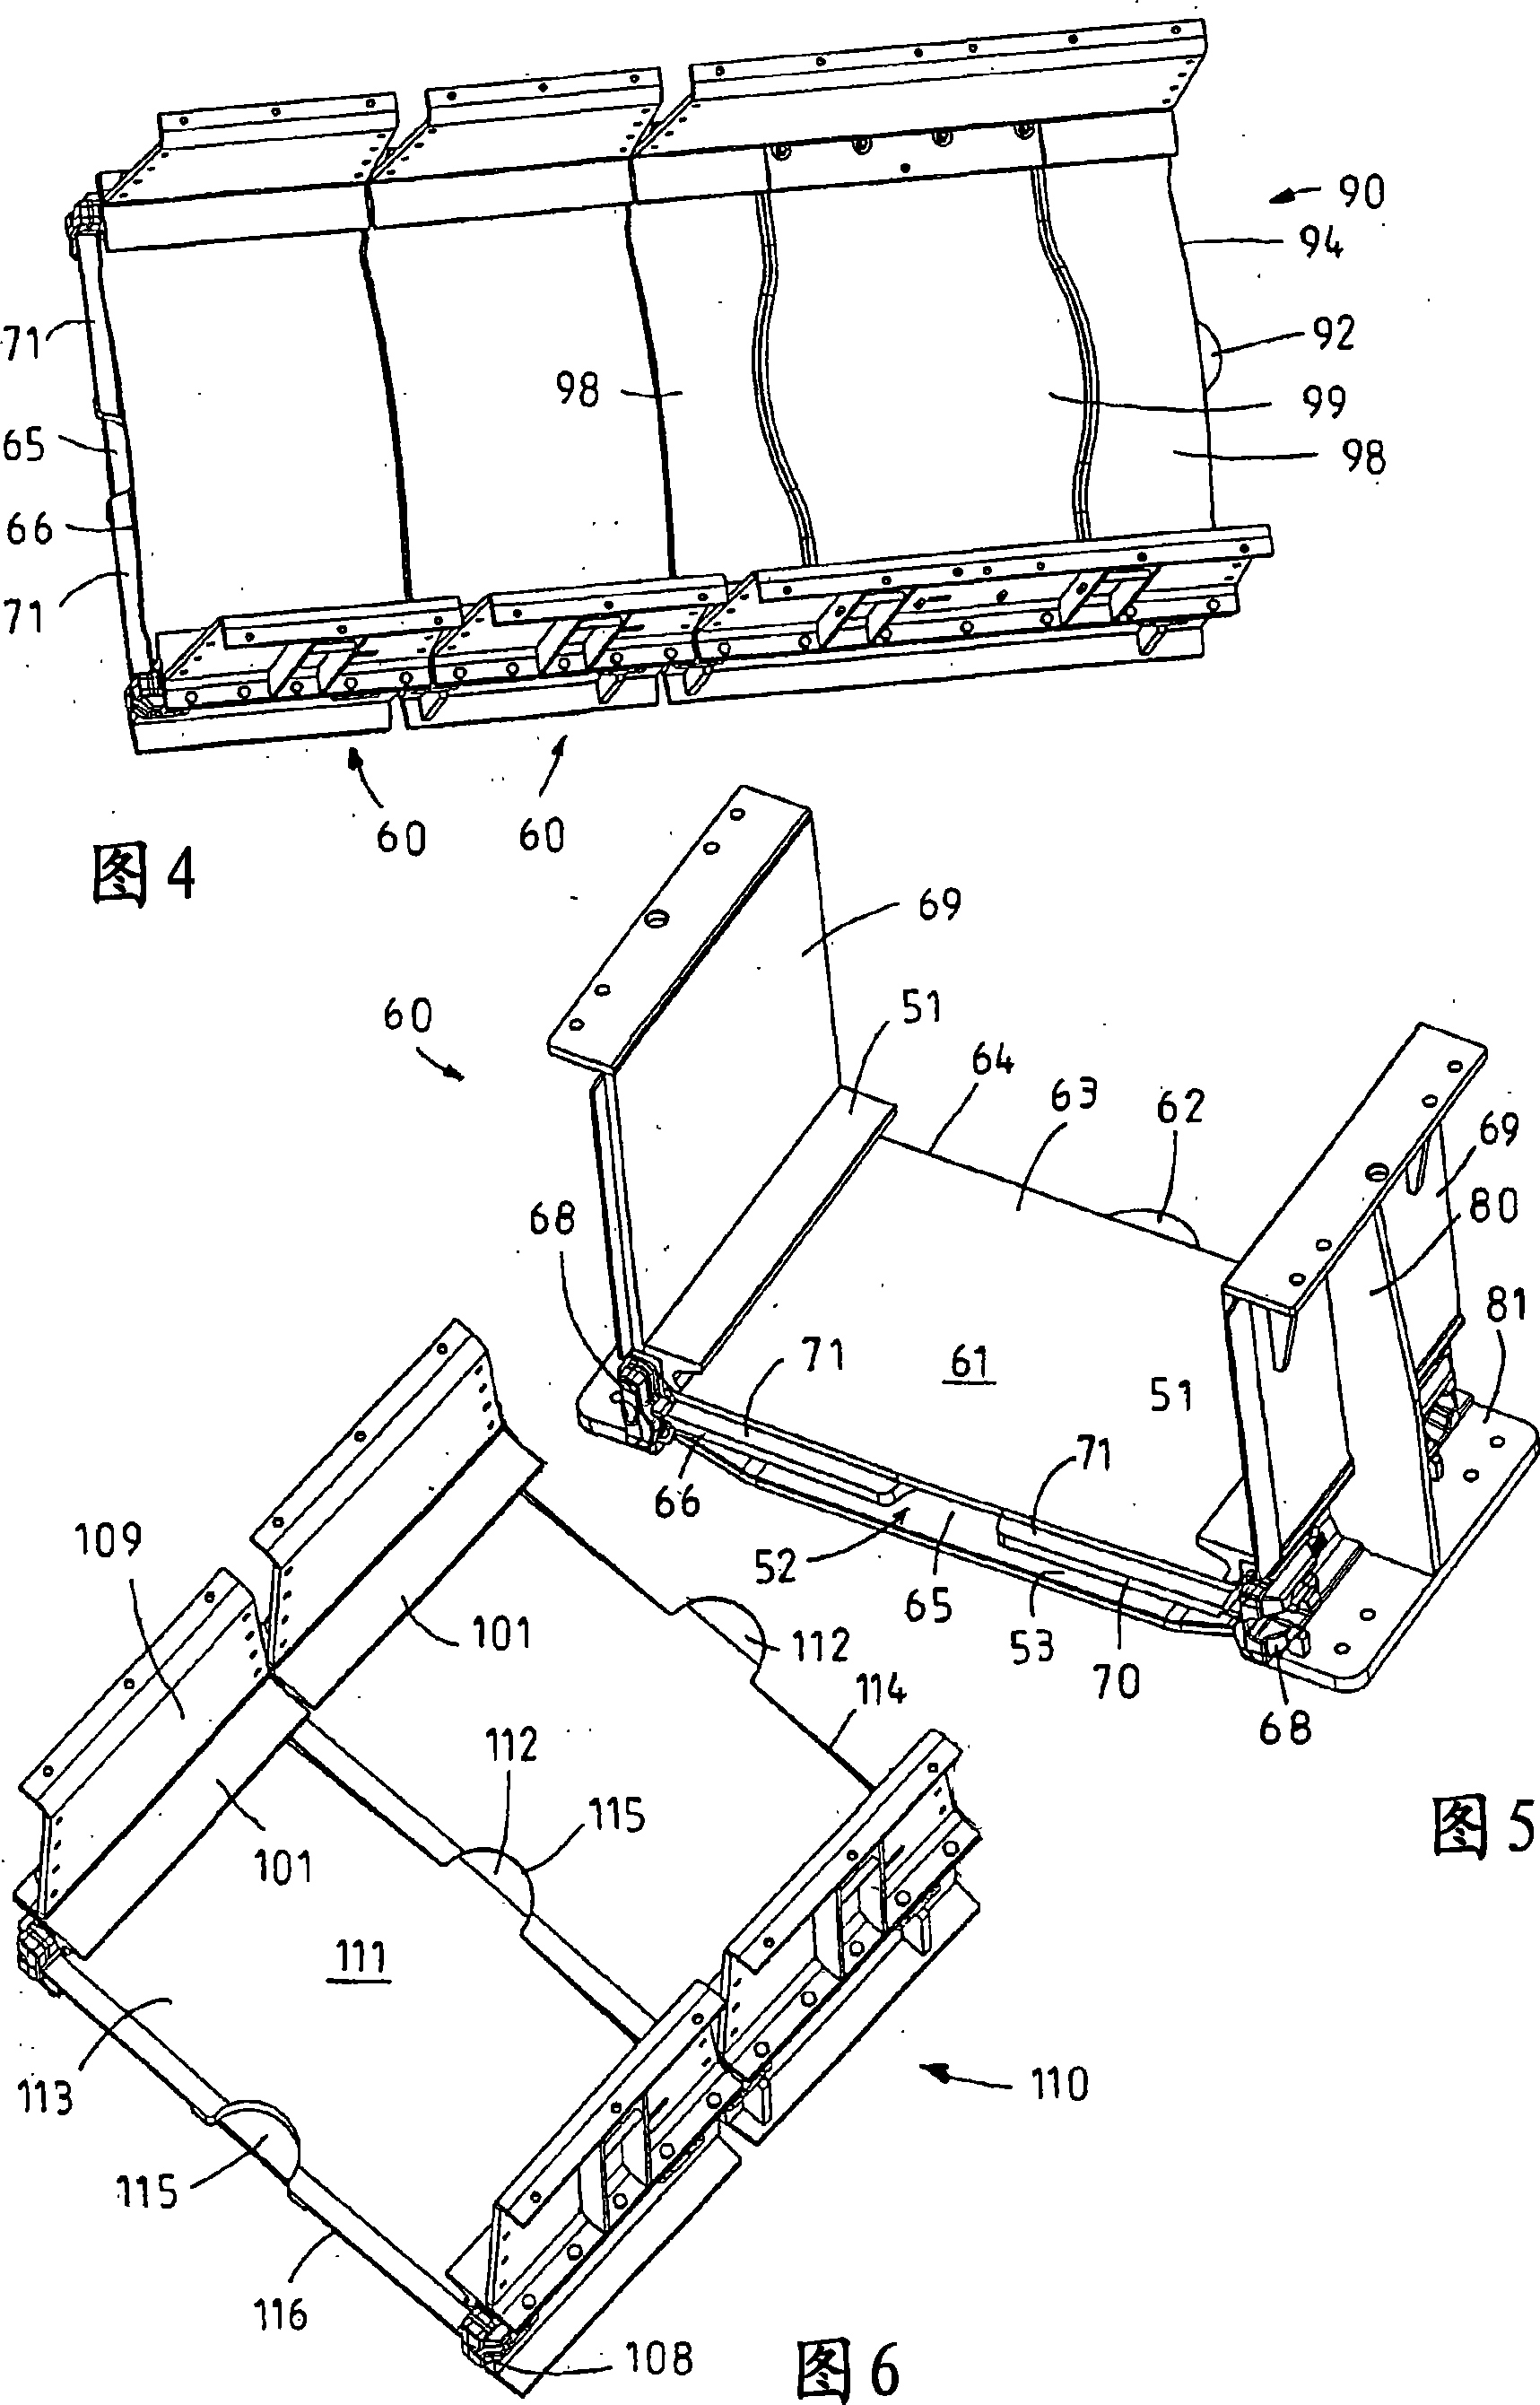 Entry conveyor and pan section for the same